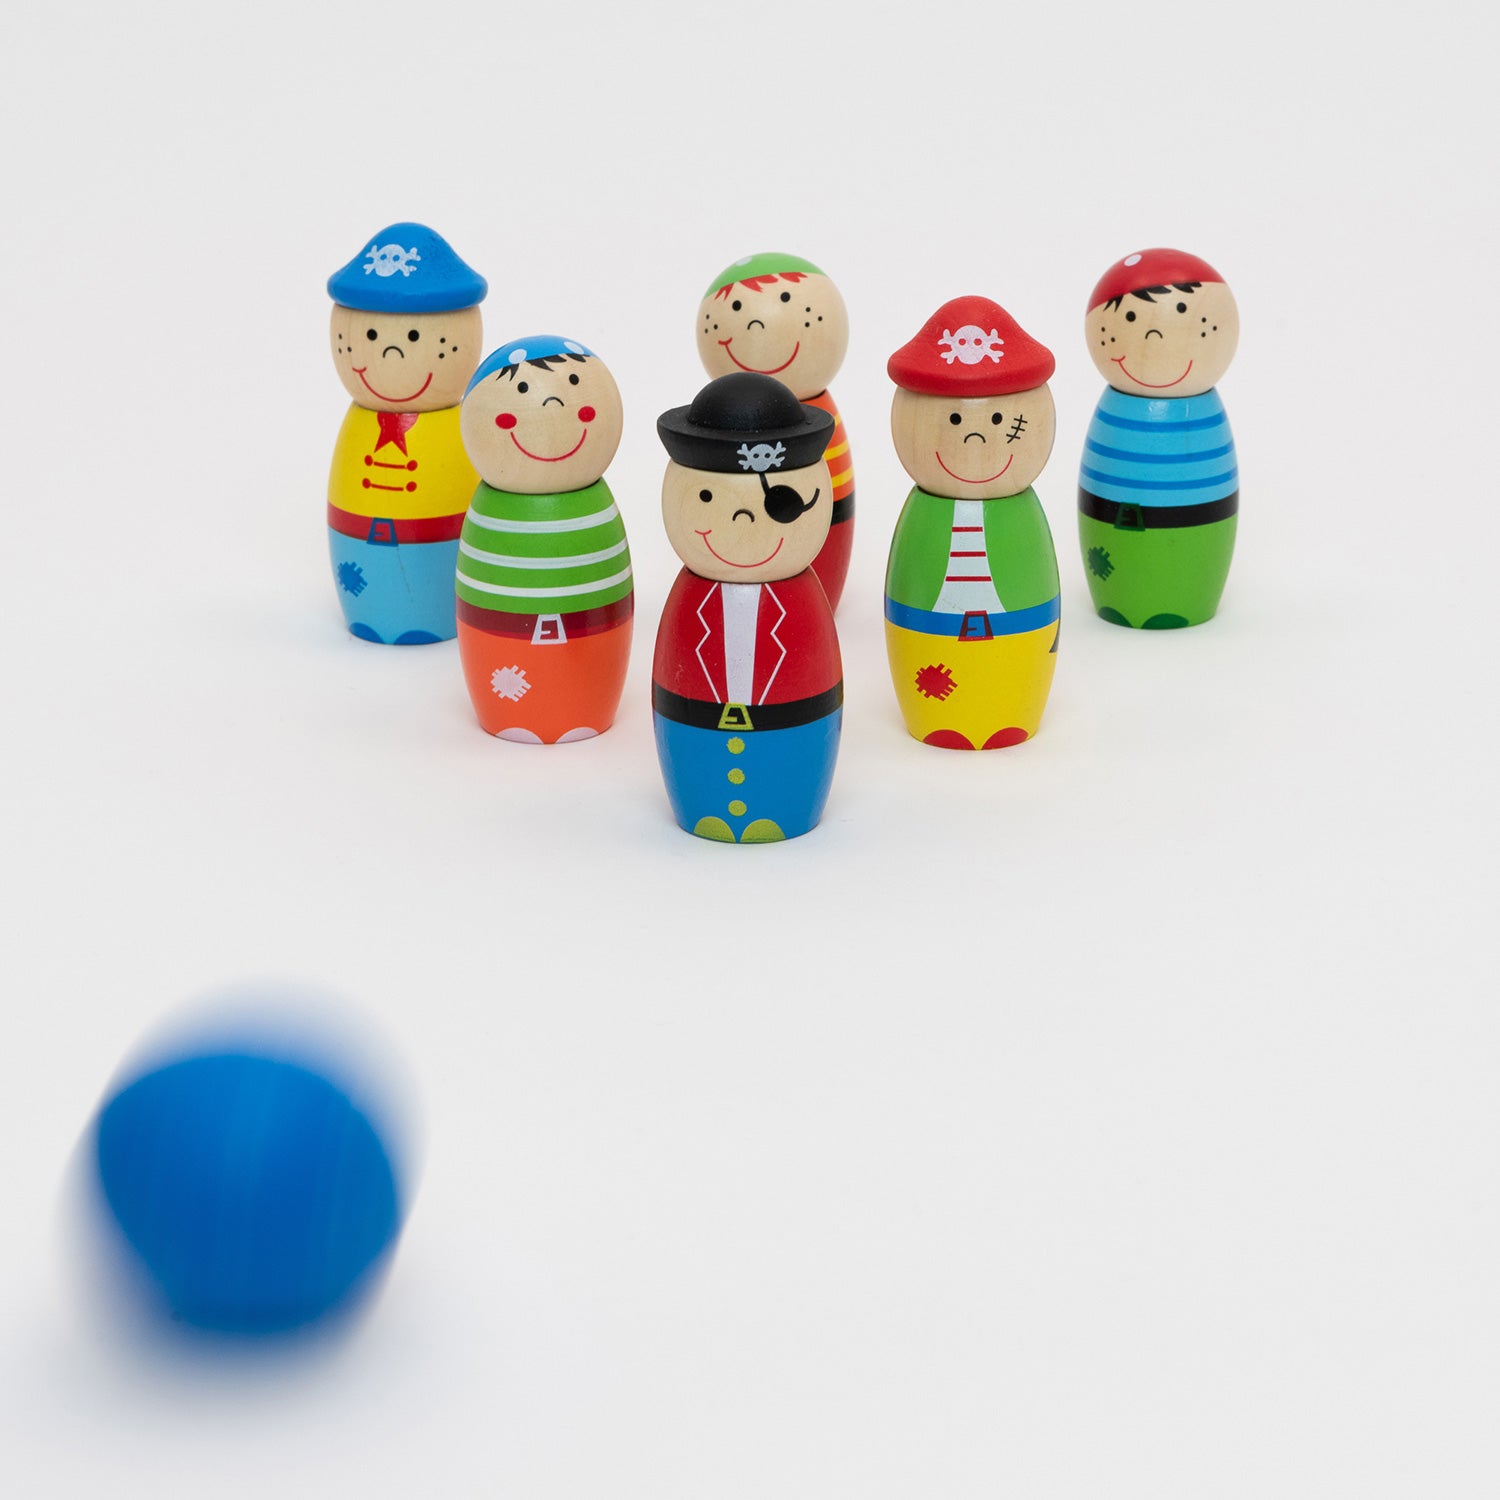 The wooden Pirate Skittles set up for a game of skittles with the blue ball moving towards the skittles.